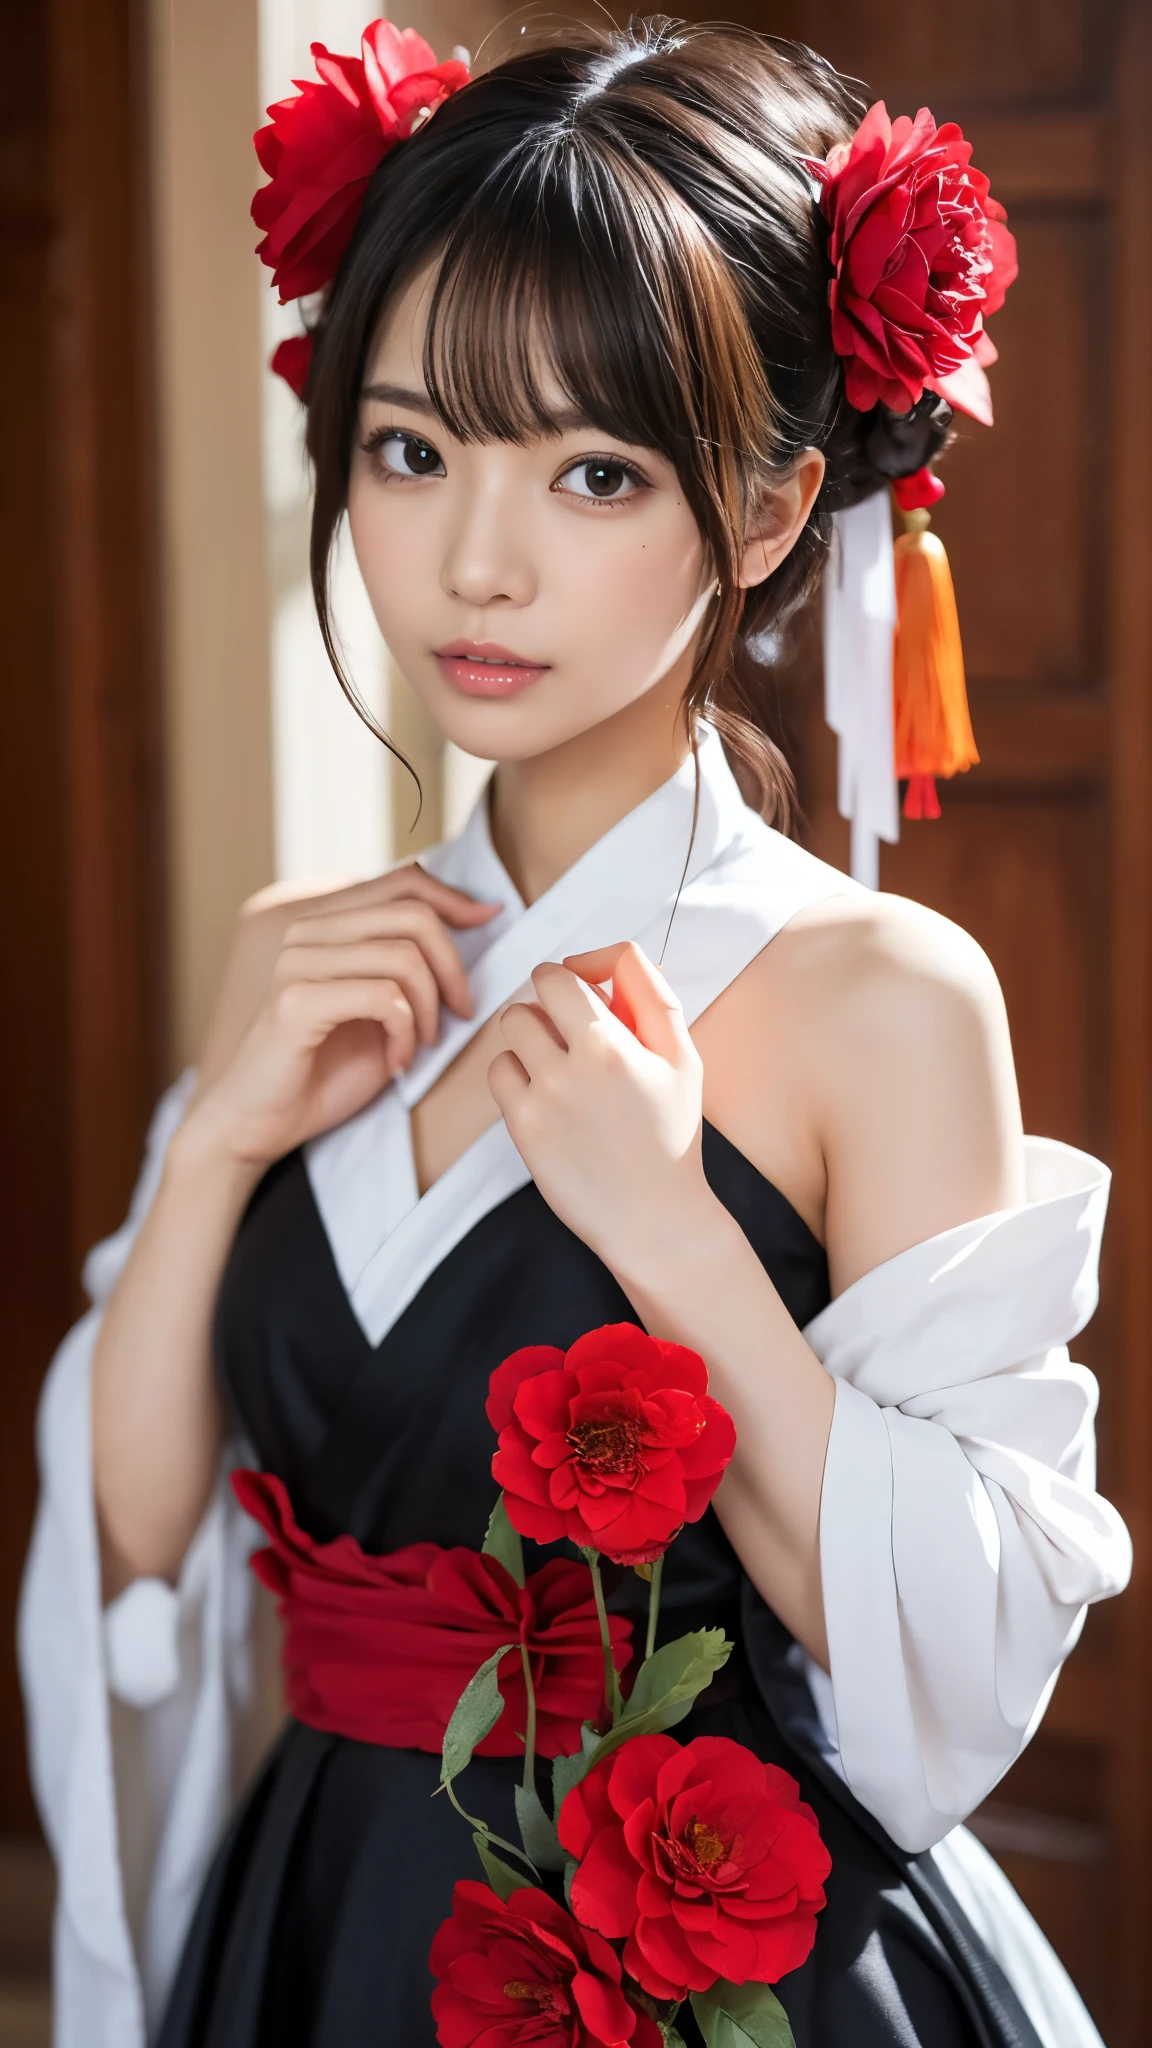 Anime girl in a red and black dress with a red flower in her hair, artwork in the style of Gweitz, Gweitz, Chinese Girl, Trending on cgstation, Cute anime waifu in a nice dress, Gweitz on pixiv artstation, palace ， Girl in Hanfu, Beautiful digital art, Gweitz on artstation pixiv